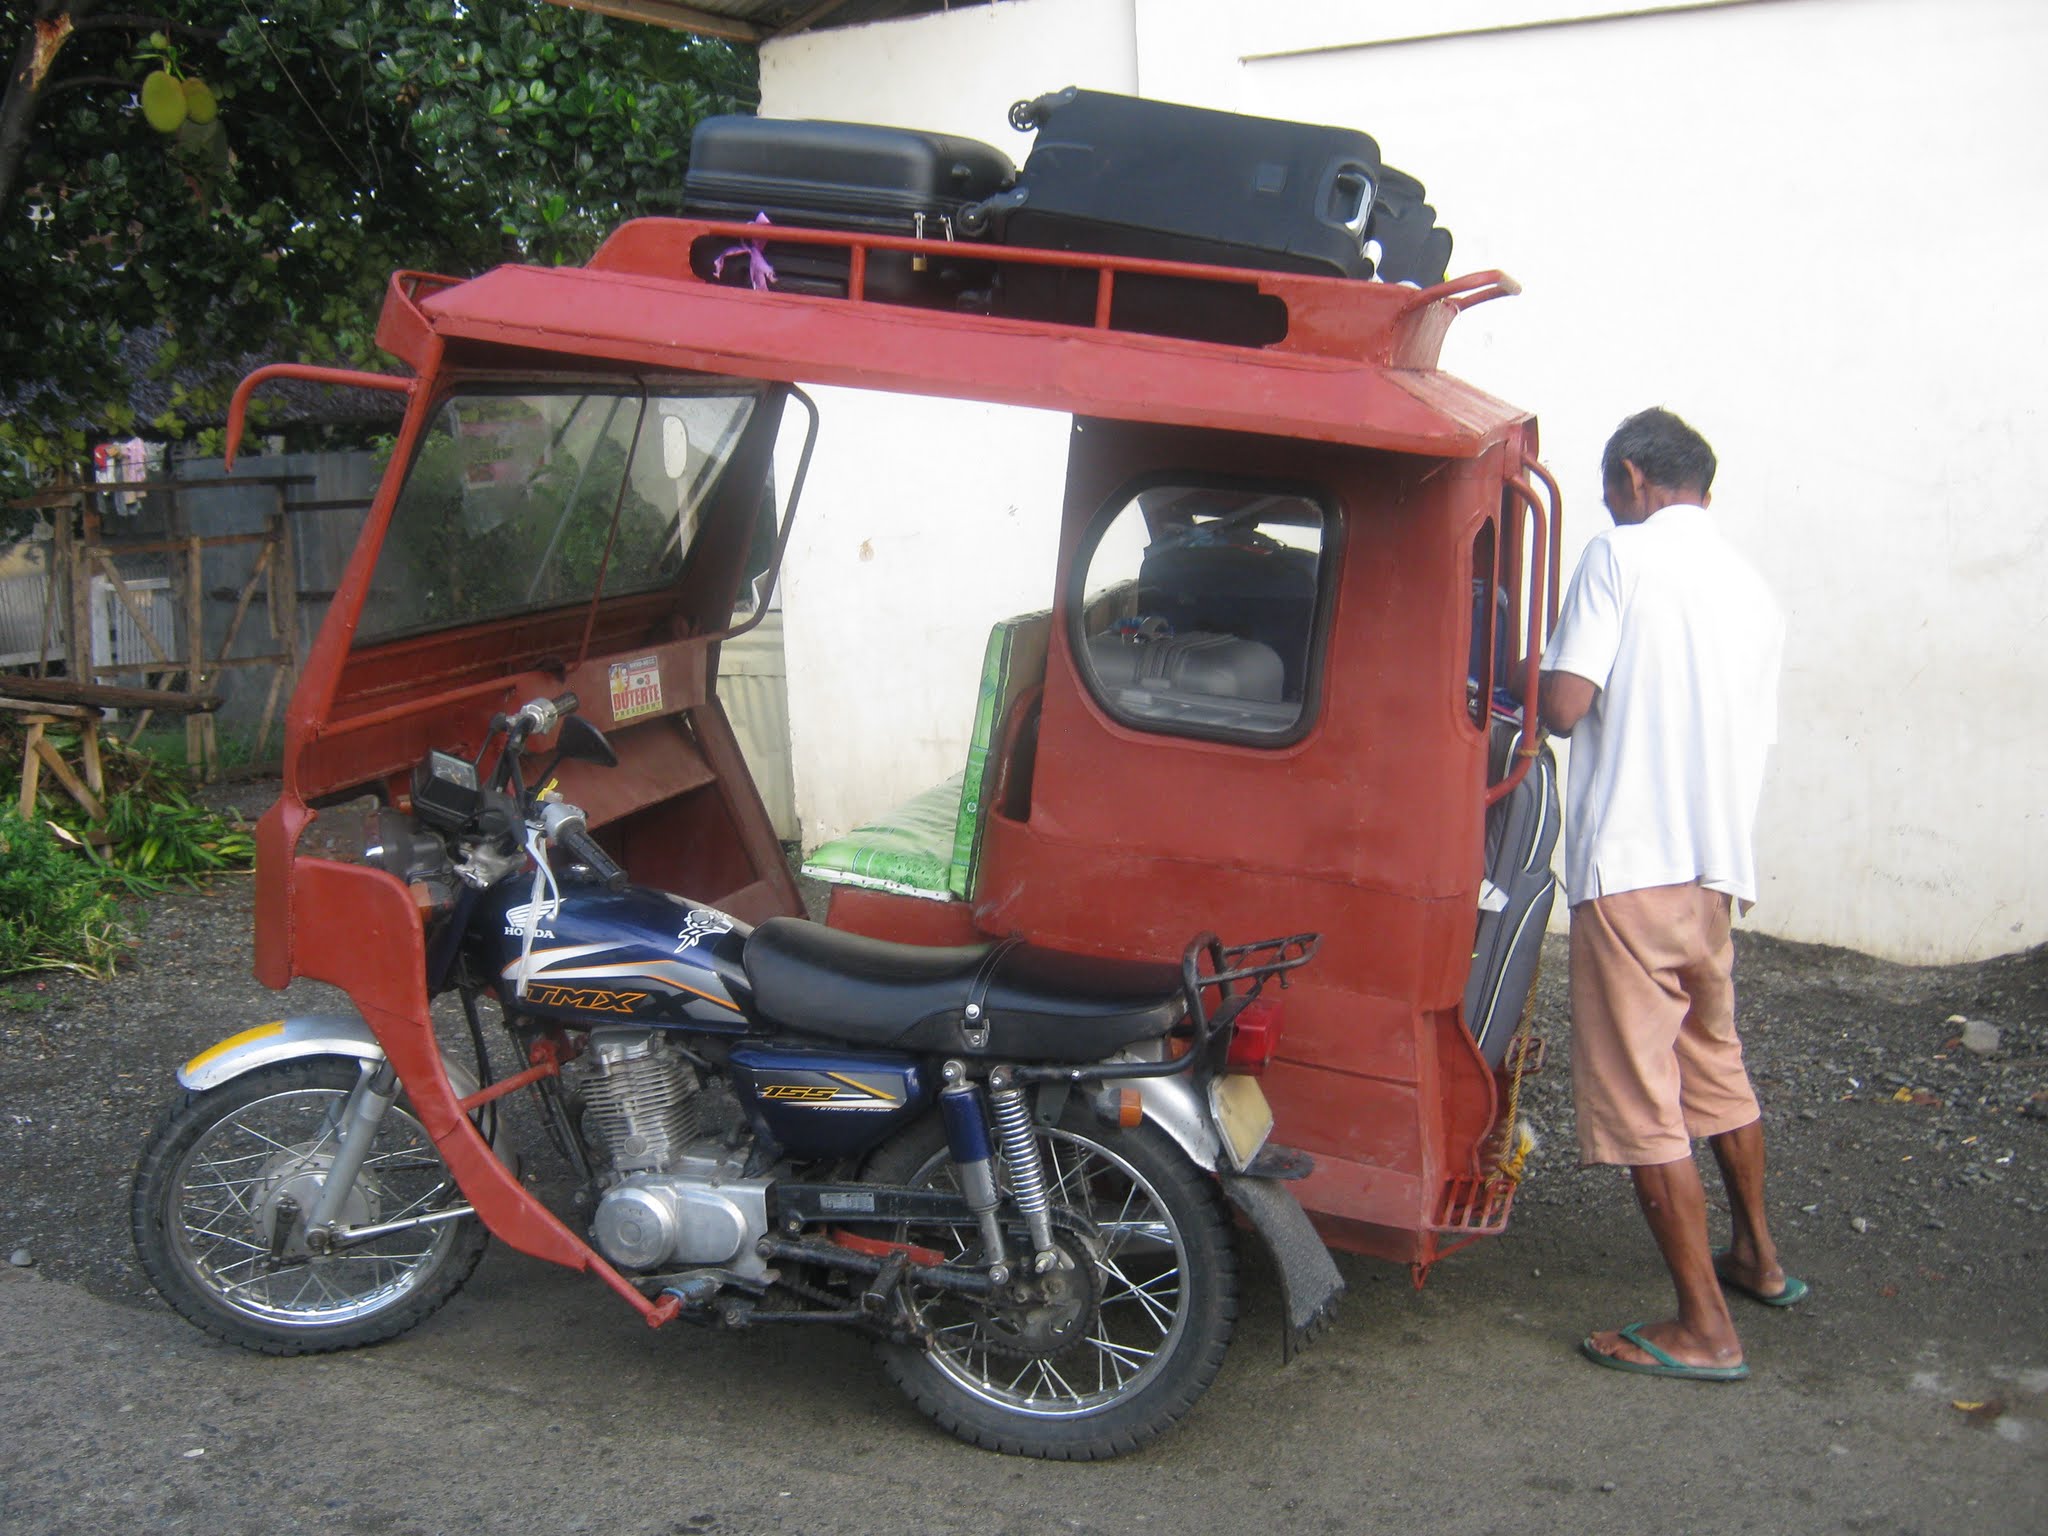 Motor Tricycle- Provide an education to gain self- sufficiency." - www.NextStepPh.com